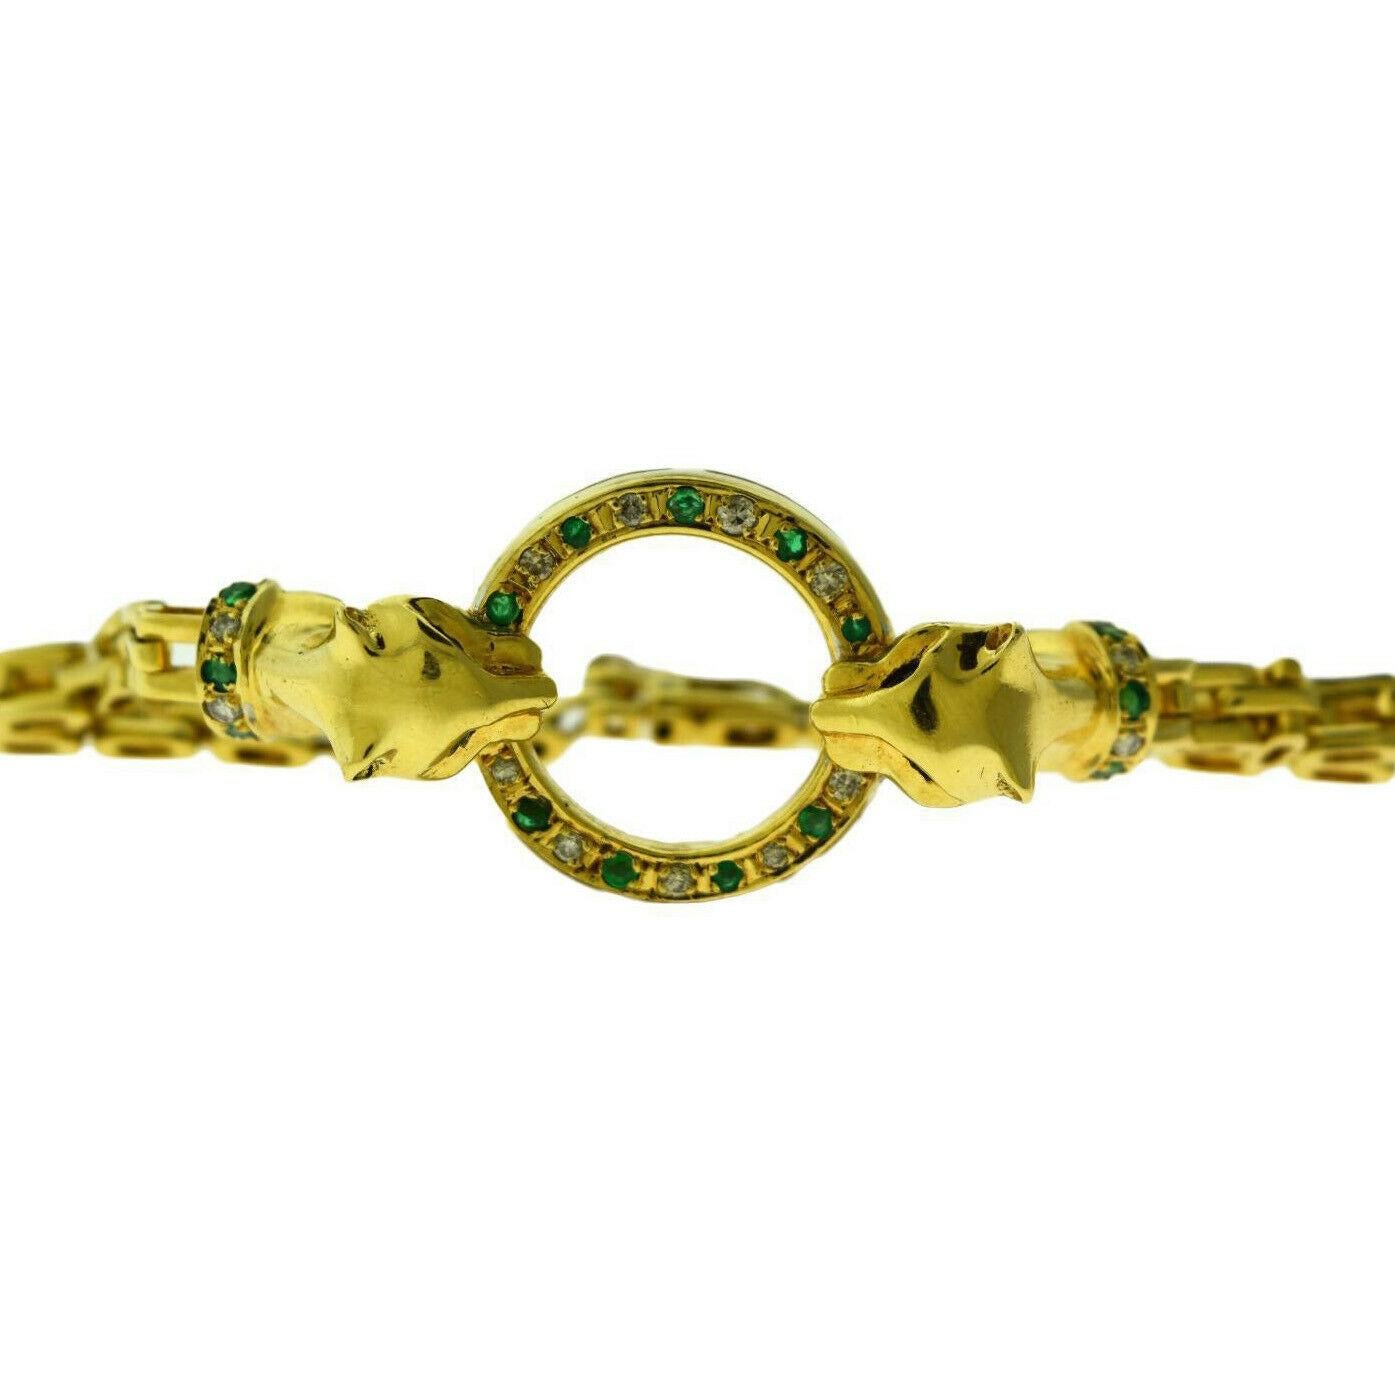 Style: Bracelet

Metal Type: Yellow Gold

Metal Purity: 18k

Stones: 16 Emeralds, 13 Diamonds

Total Item Weight (grams): 19.9

Bracelet Length: approx. 6.5 inches

Circle Diameter: approx. 0.75 inches

Includes:  Brilliance Jewels 2 Year Warranty,